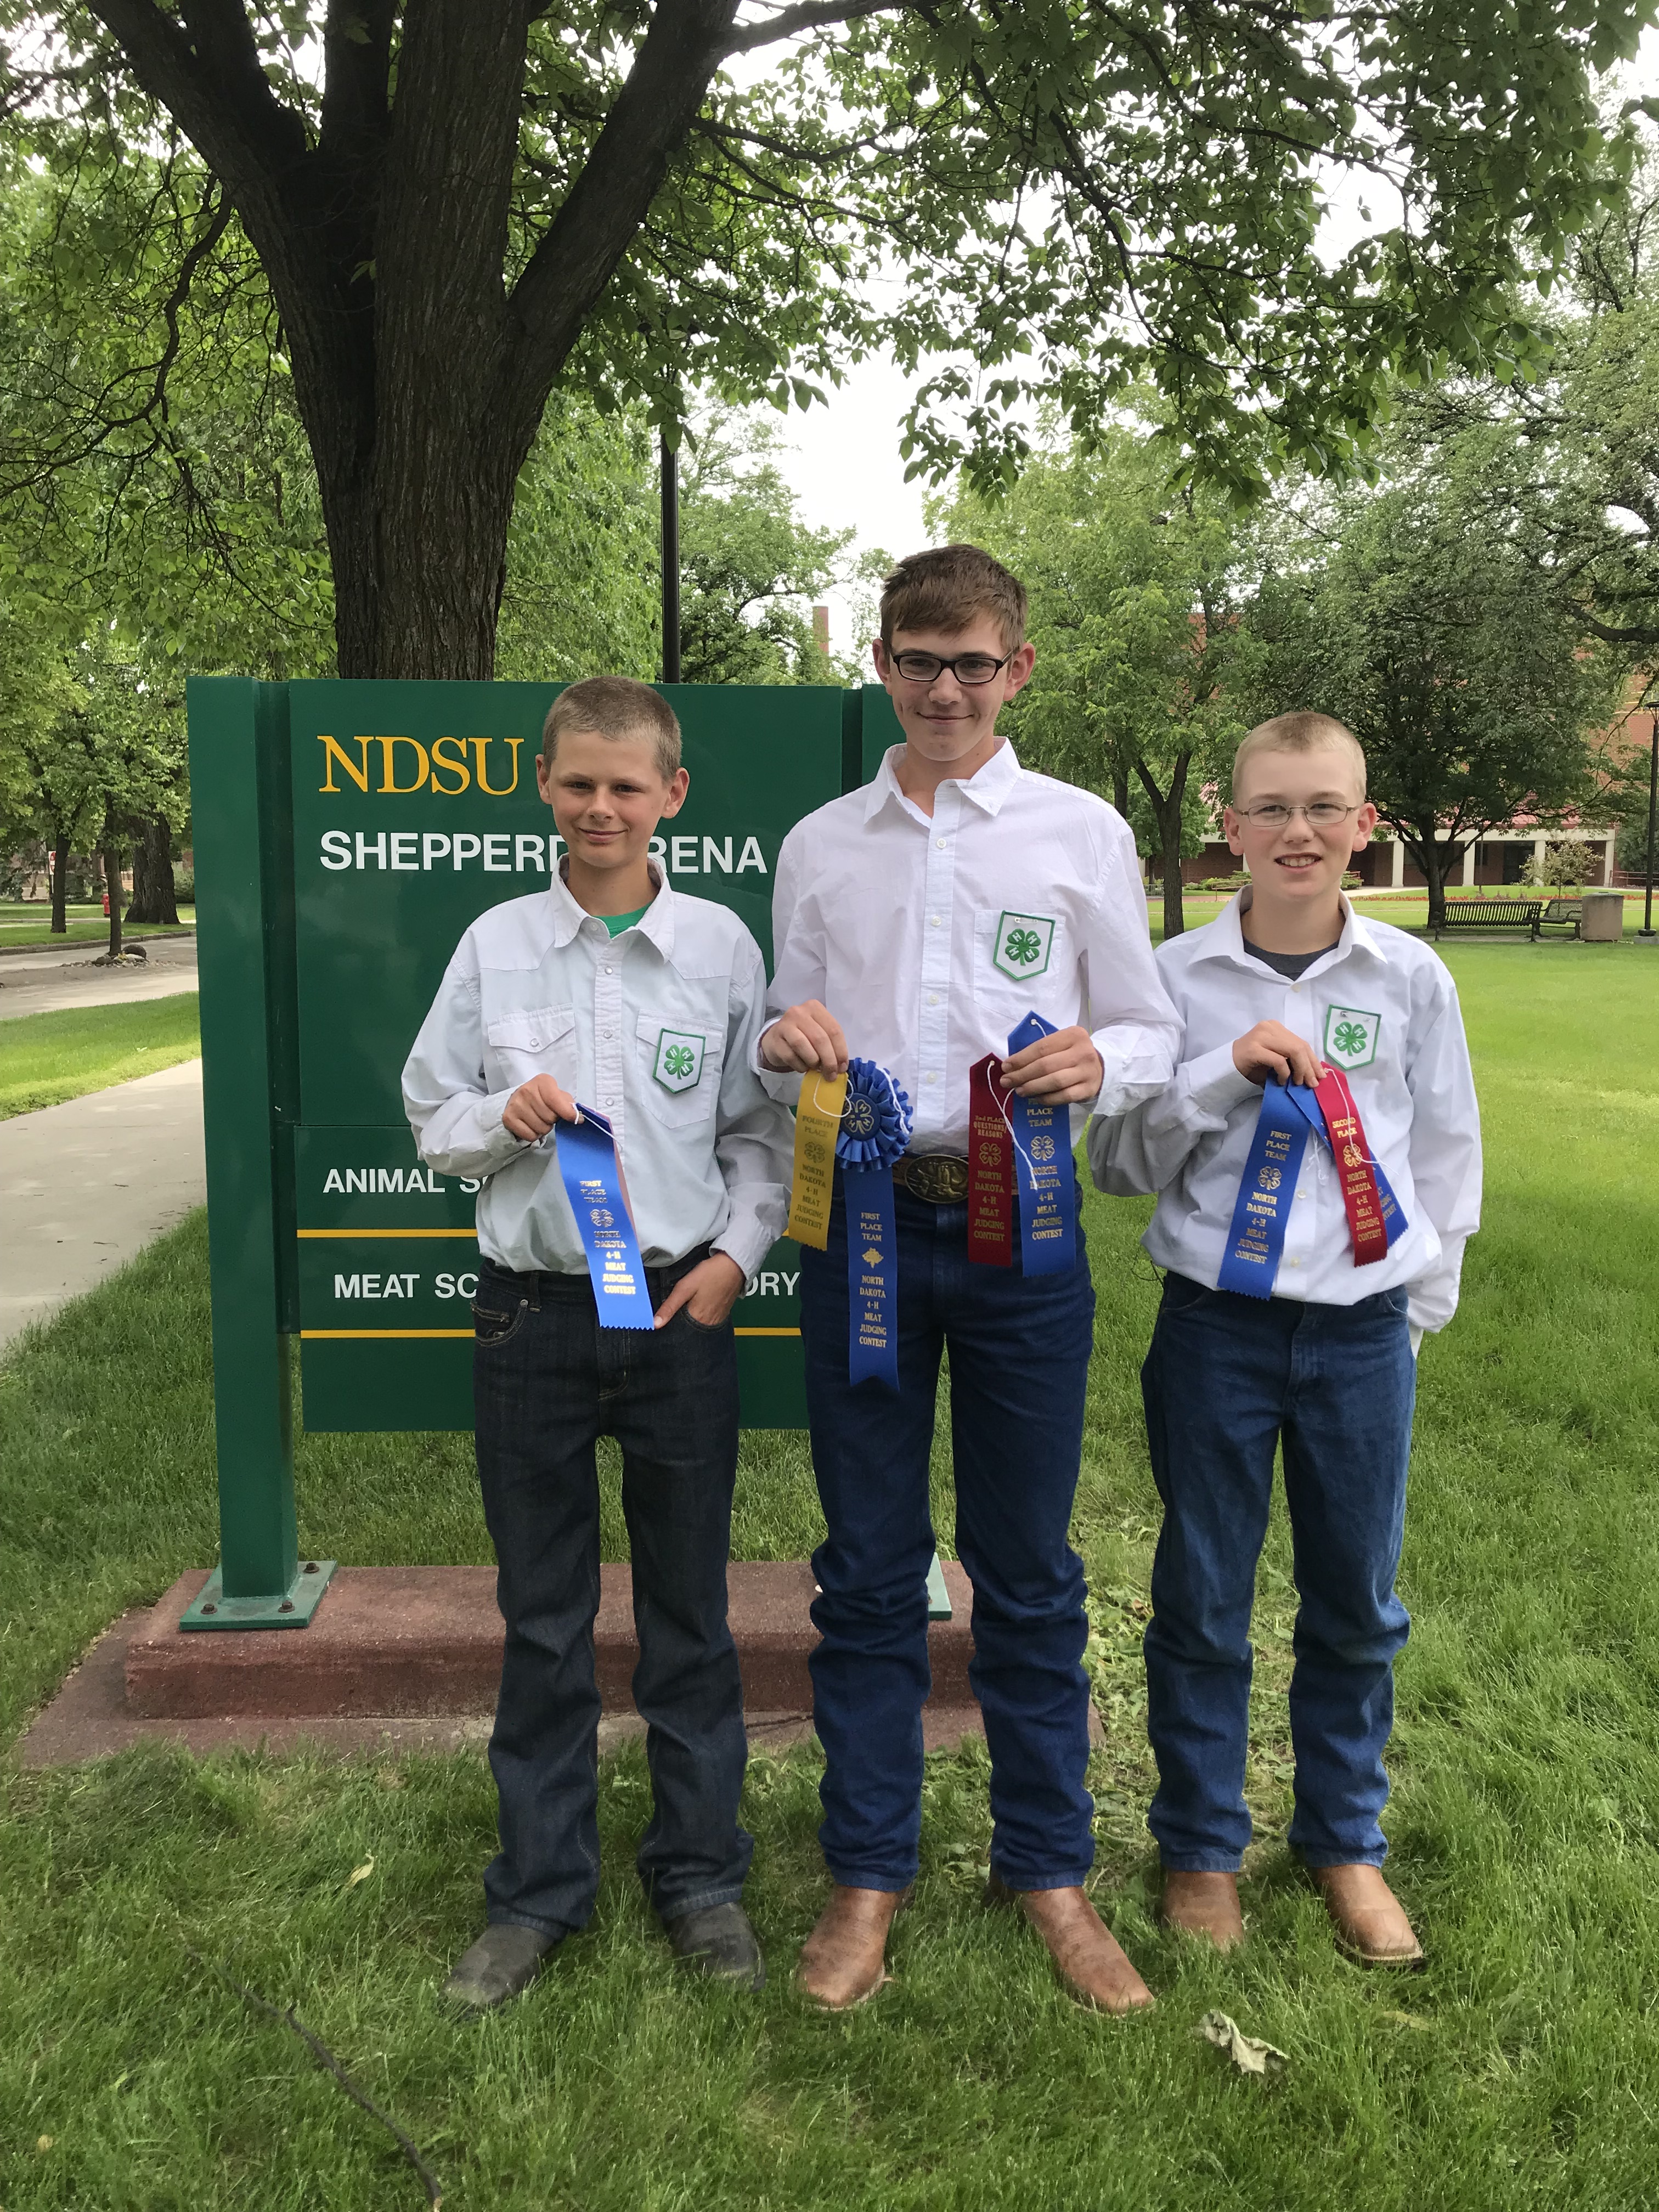 The Ward County team takes first place in the intermediate division of the State 4-H Meat Judging Contest. Team members are (from left): Wyatt Kersten, Mason Kraft and Mark Schauer. (NDSU photo)